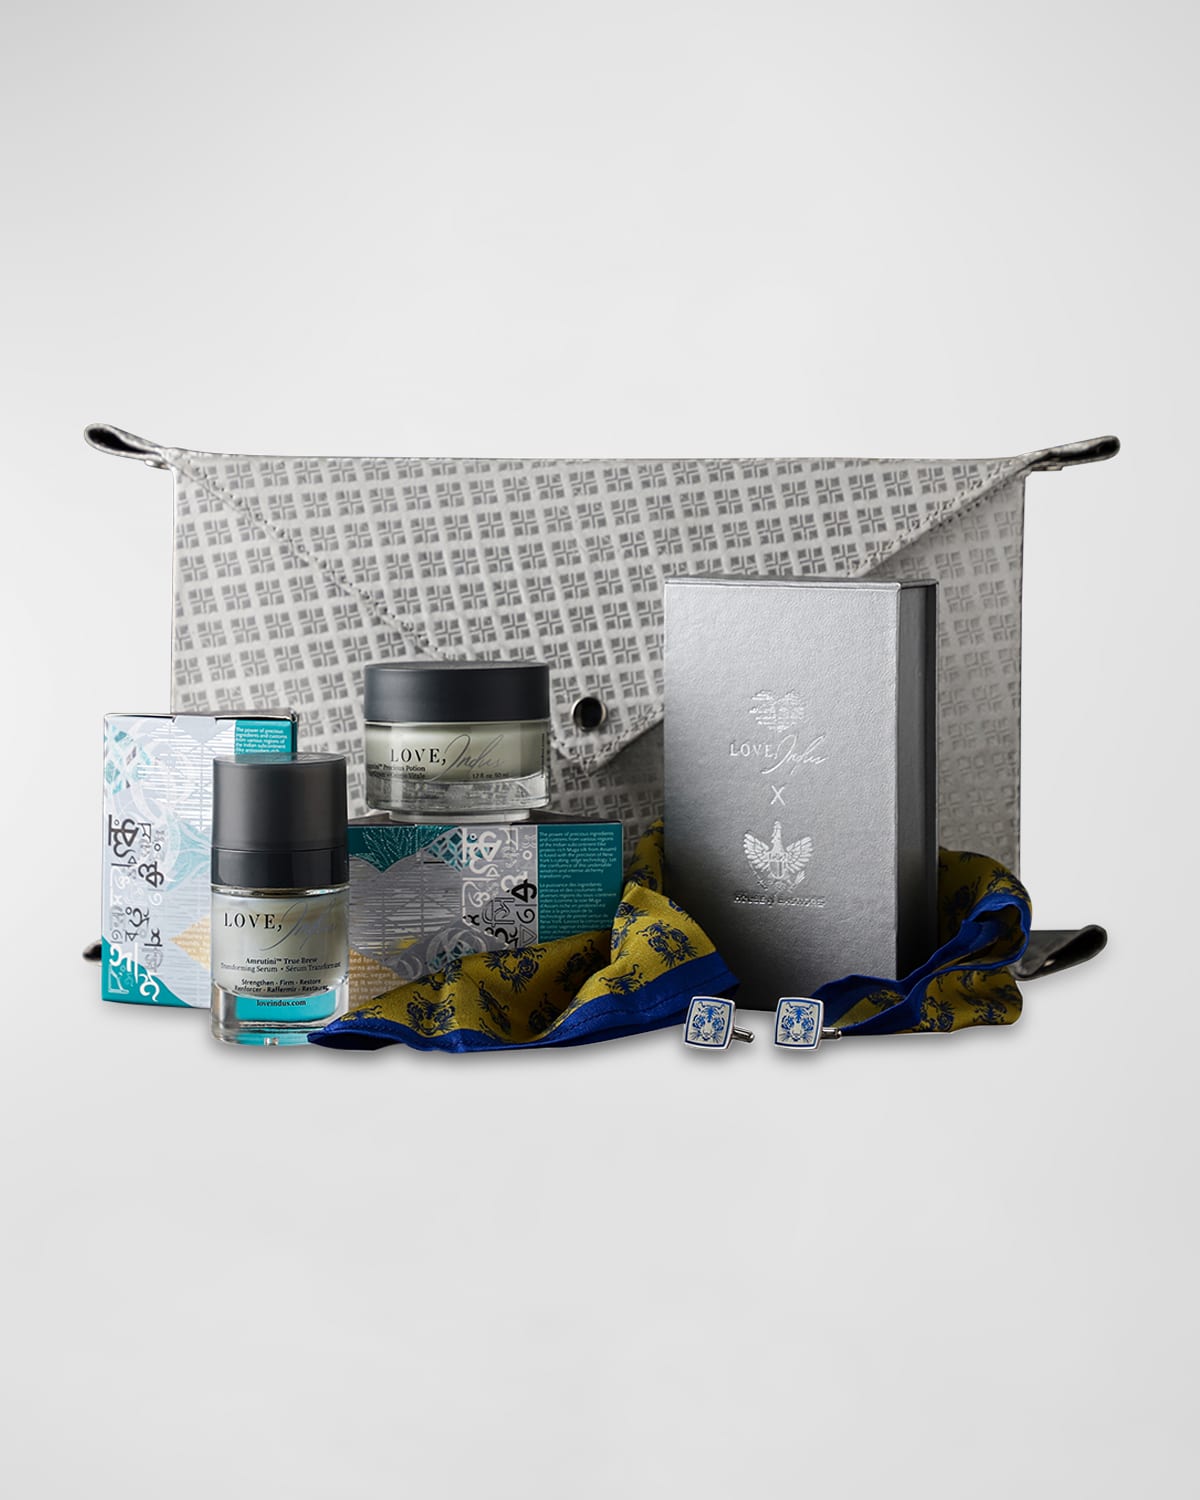 Limited Edition Gift Set: Men's Edition ($290 Value)